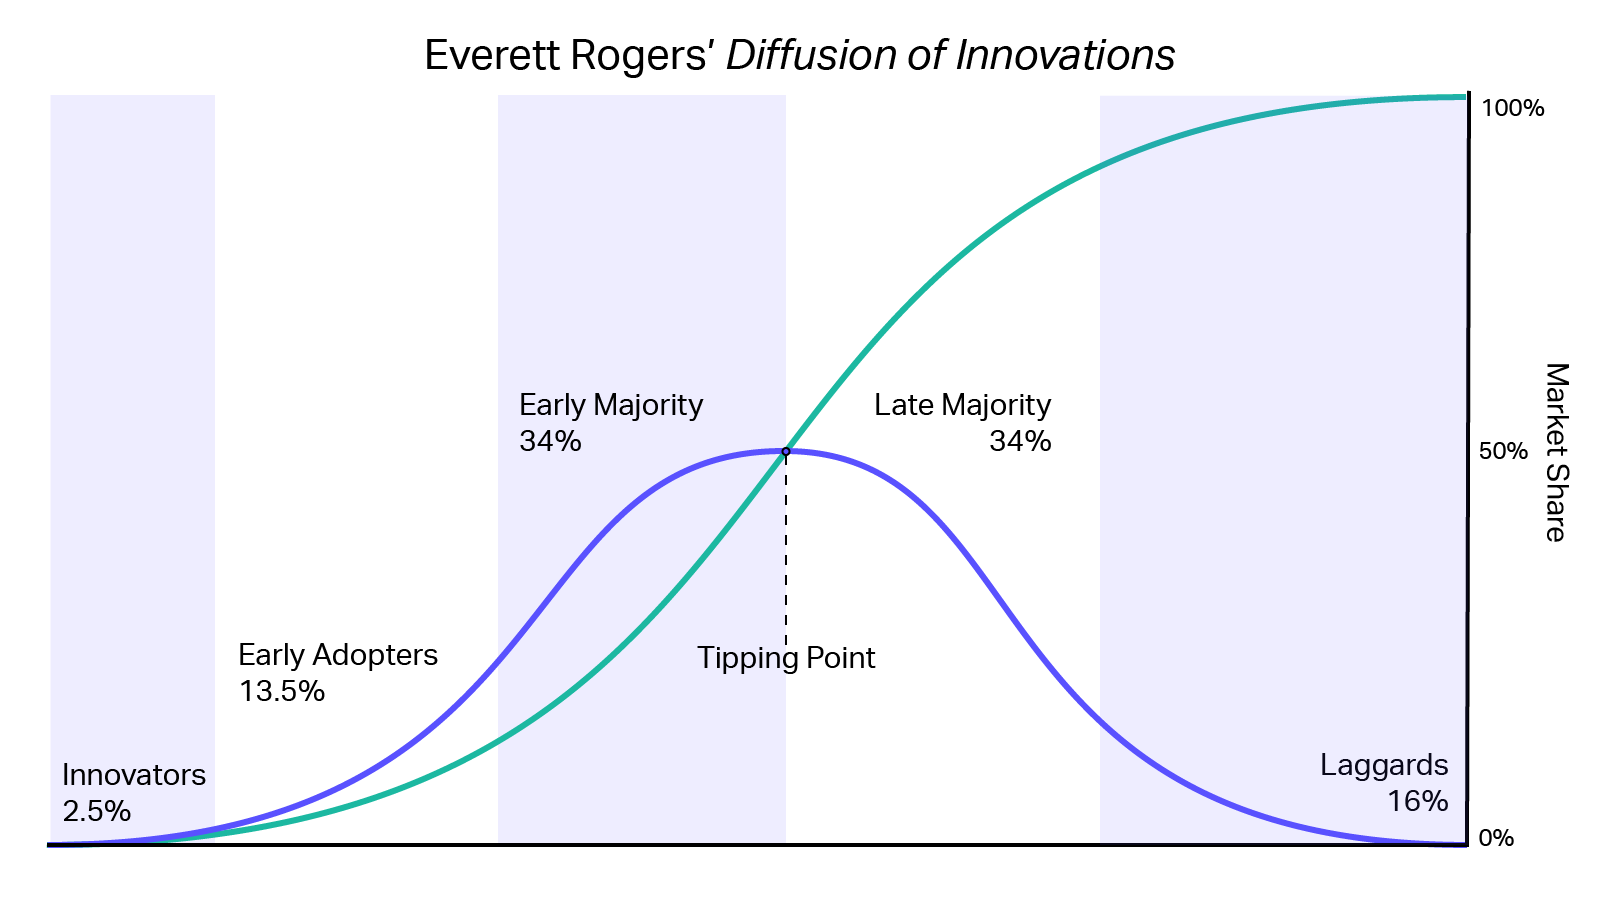 Everett Rogers’ Diffusion of Innovation theory represents the technology adoption lifecycle.